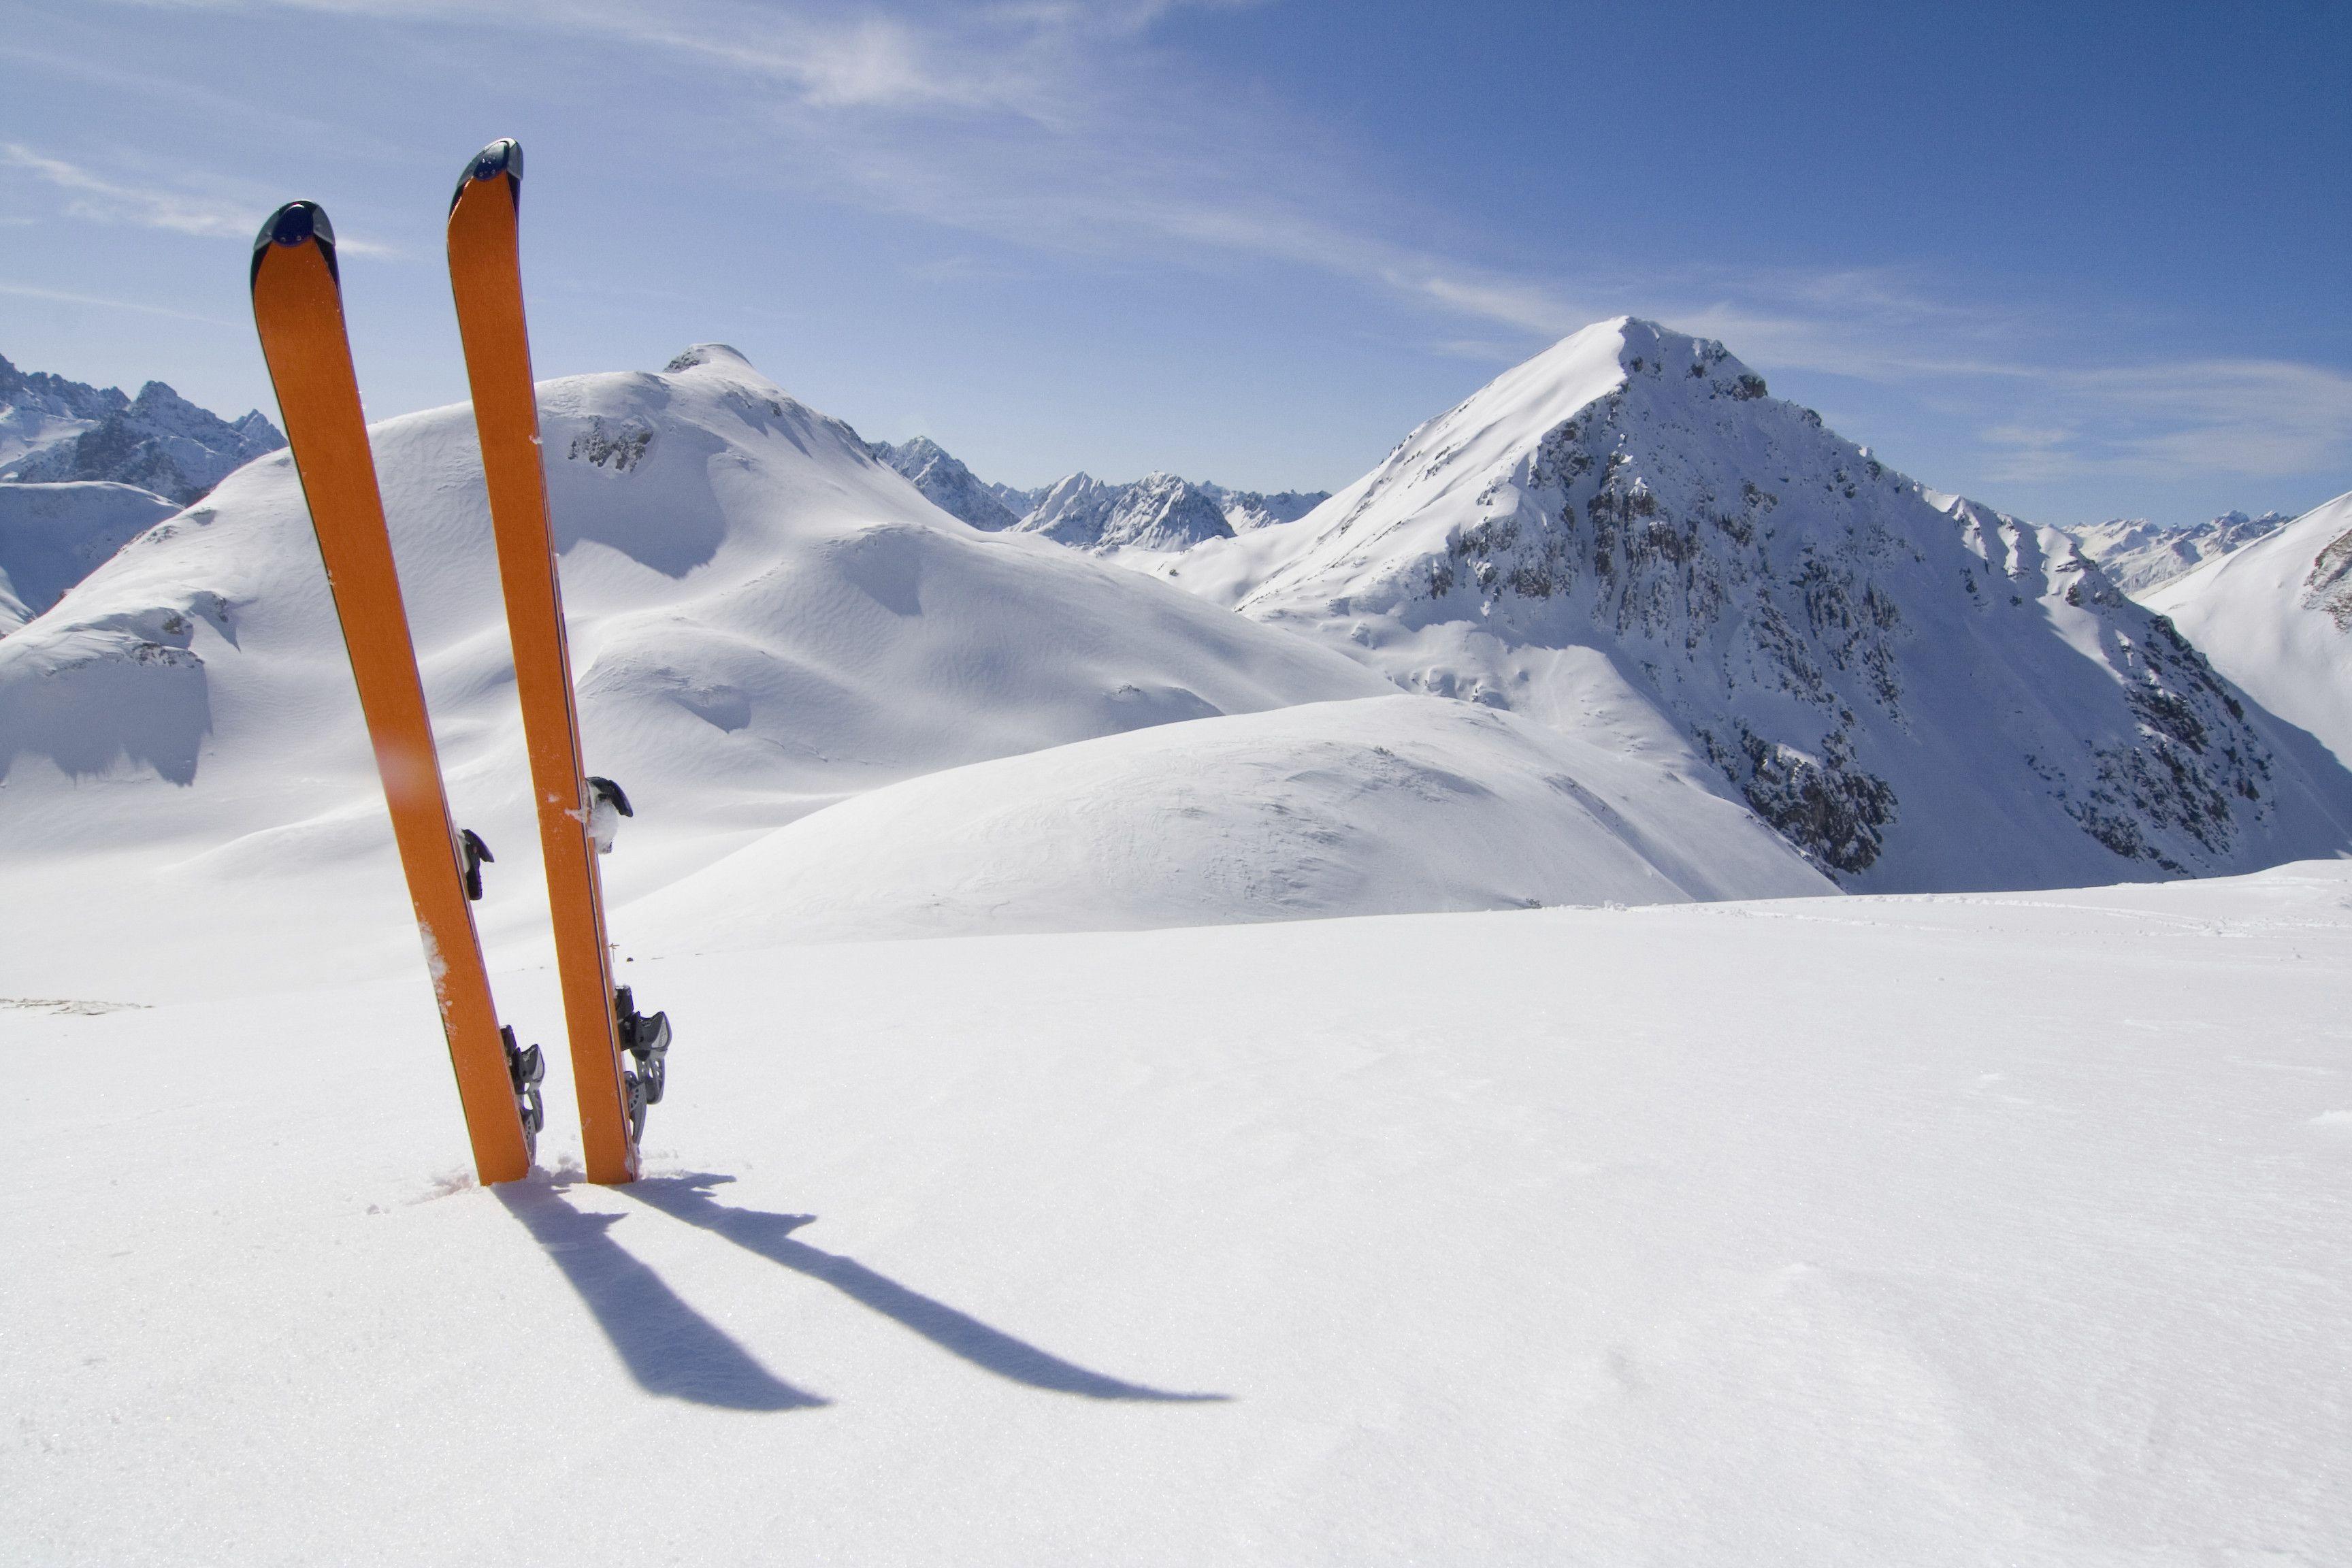 Orange skis in the snow landscape. Various sports